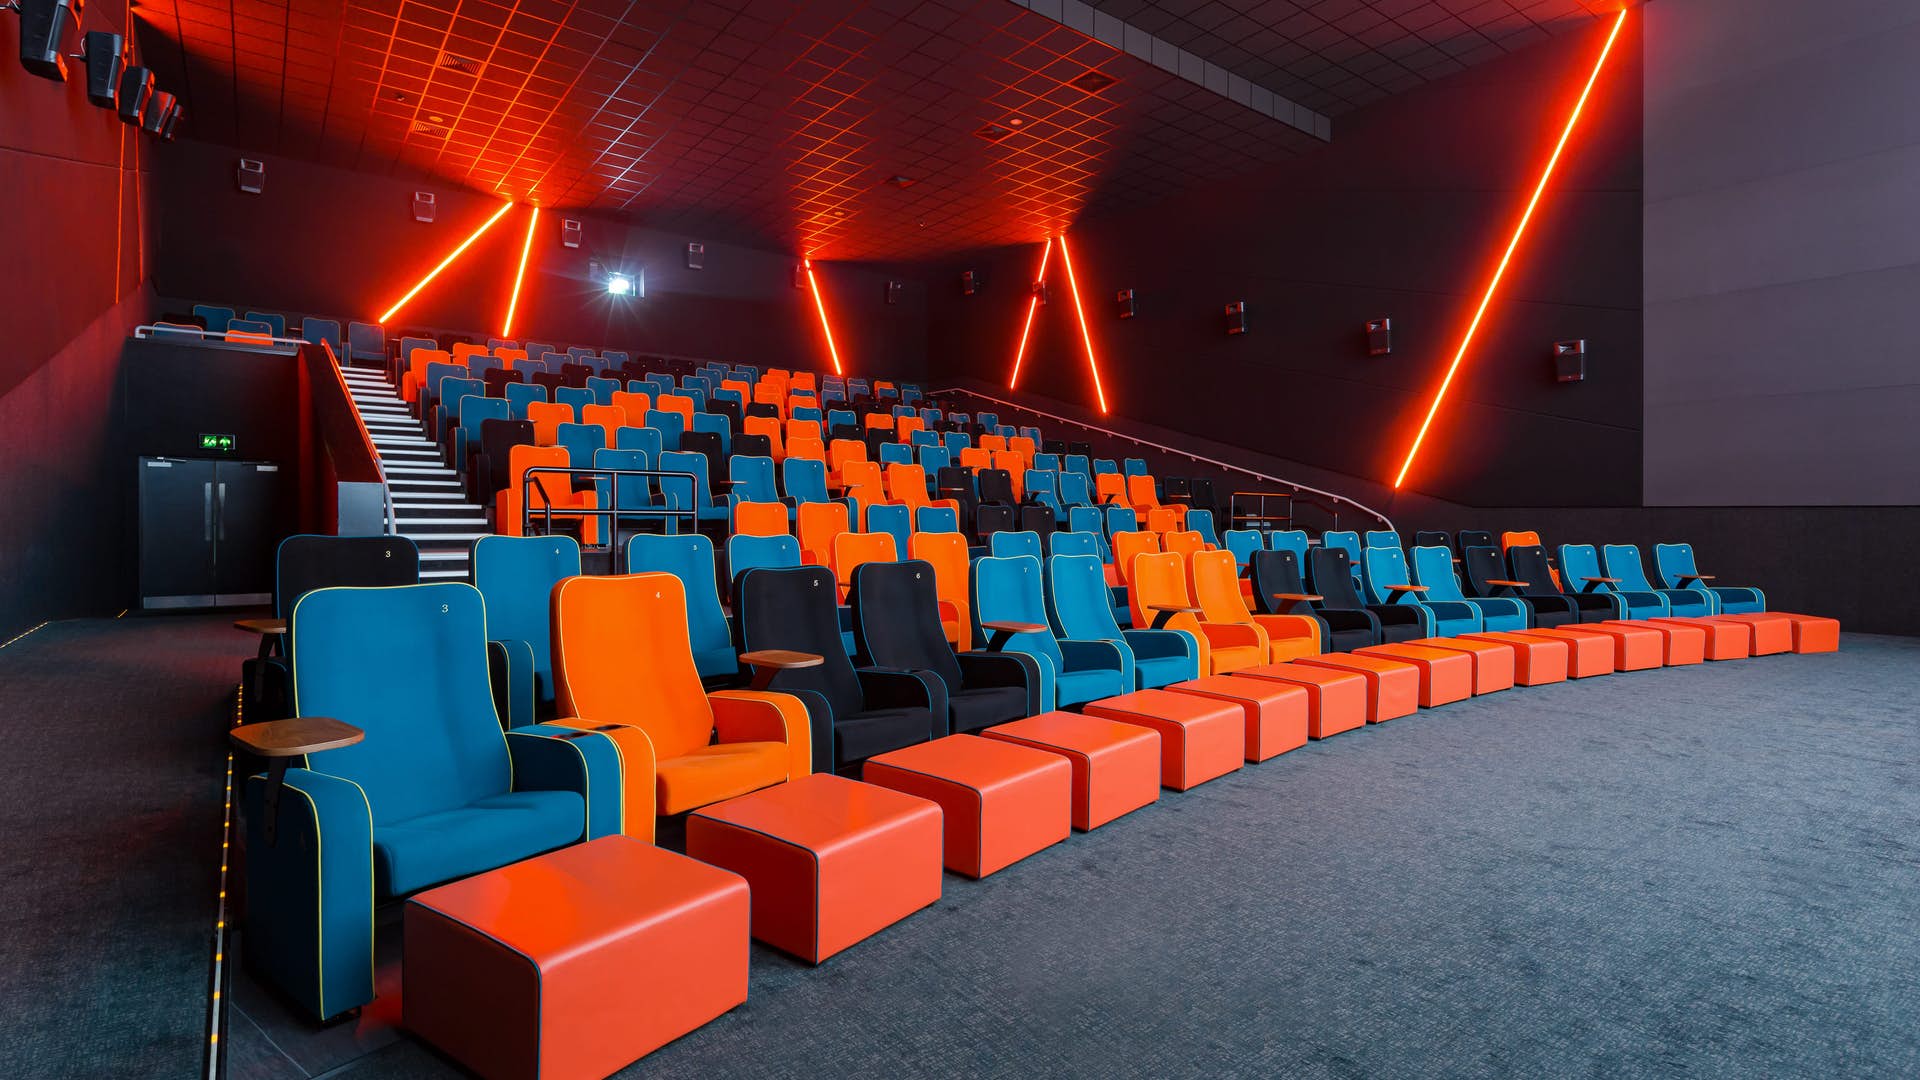 Half term offer: Food + film from £10 at Stockport's The Light Cinema -  Manchester Wire